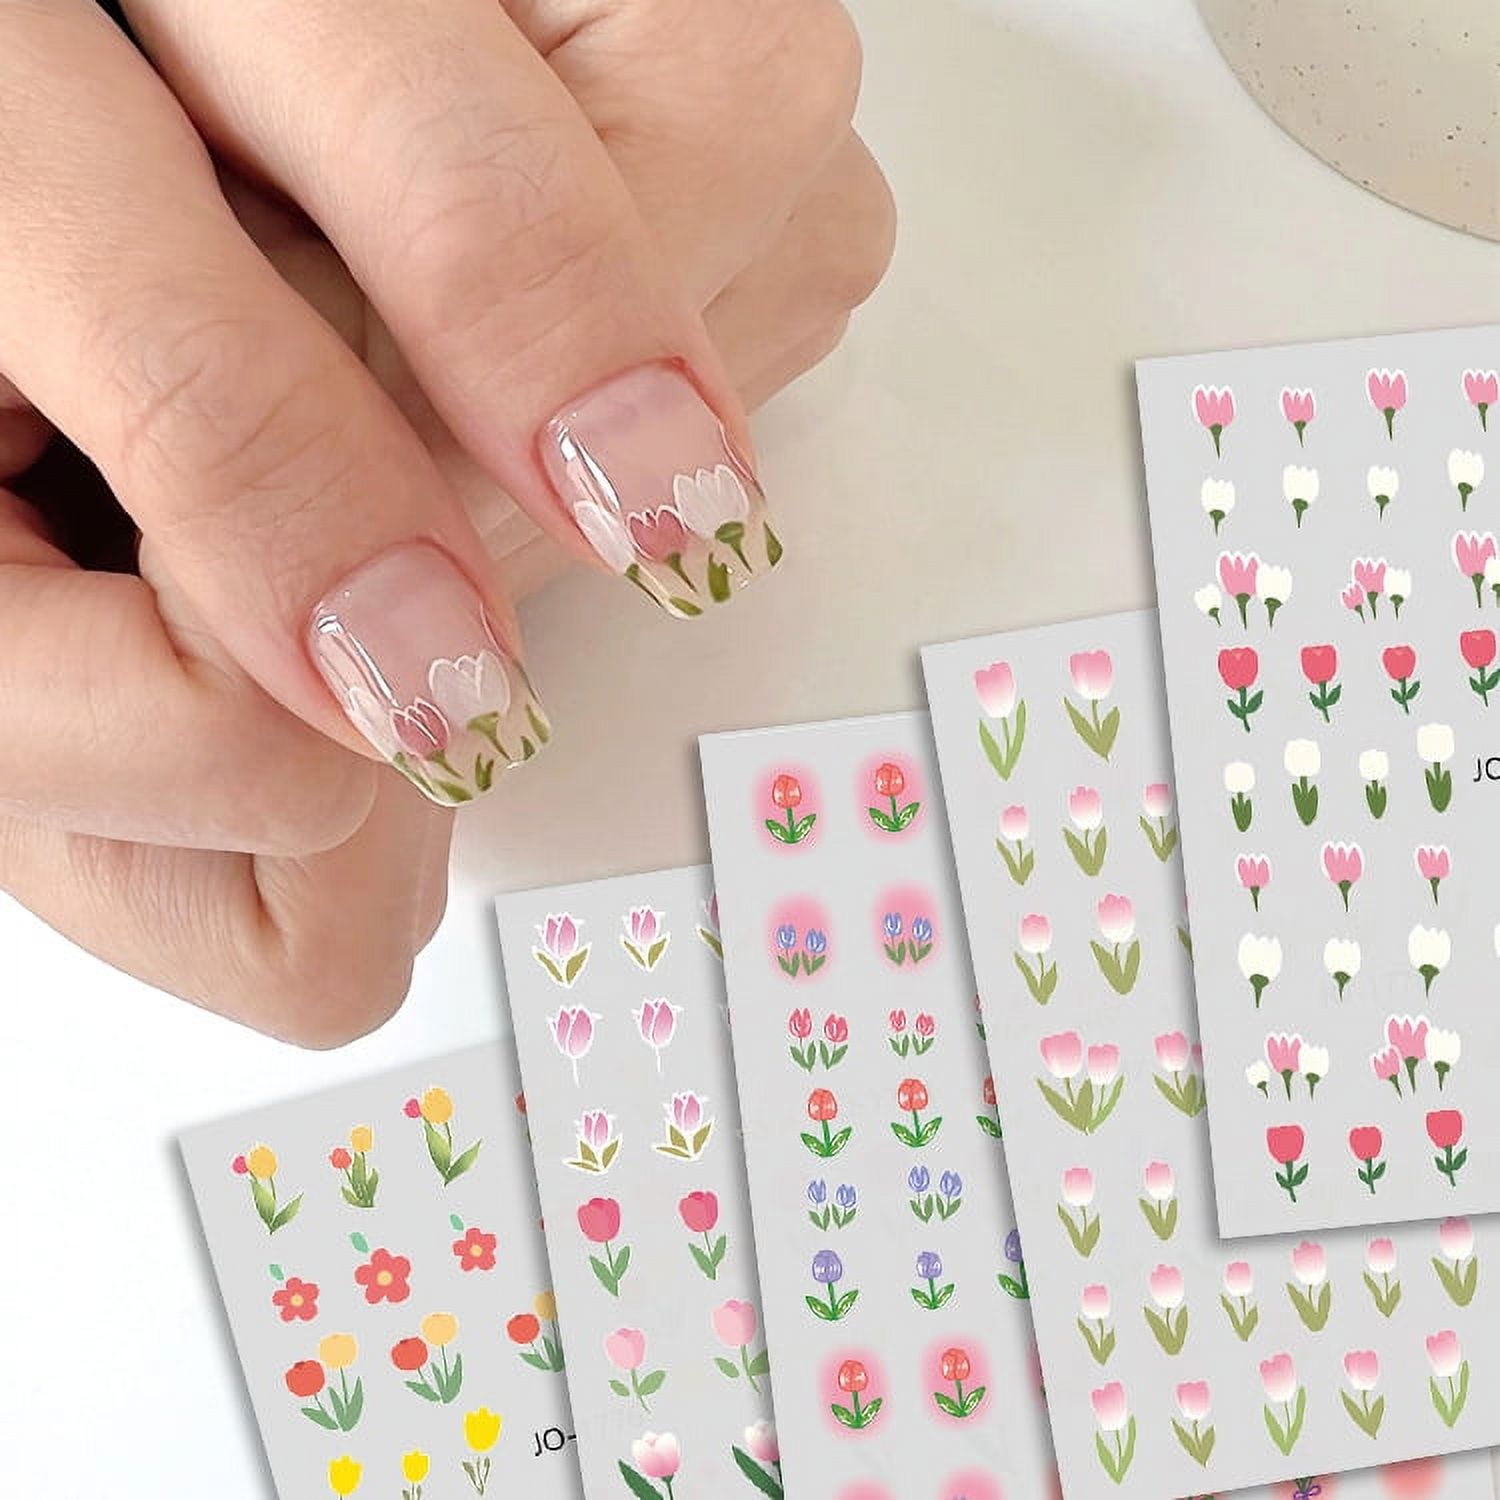 Lazy Tulips Nail Art Tutorial - Violet LeBeaux - Tales of an Ingenue